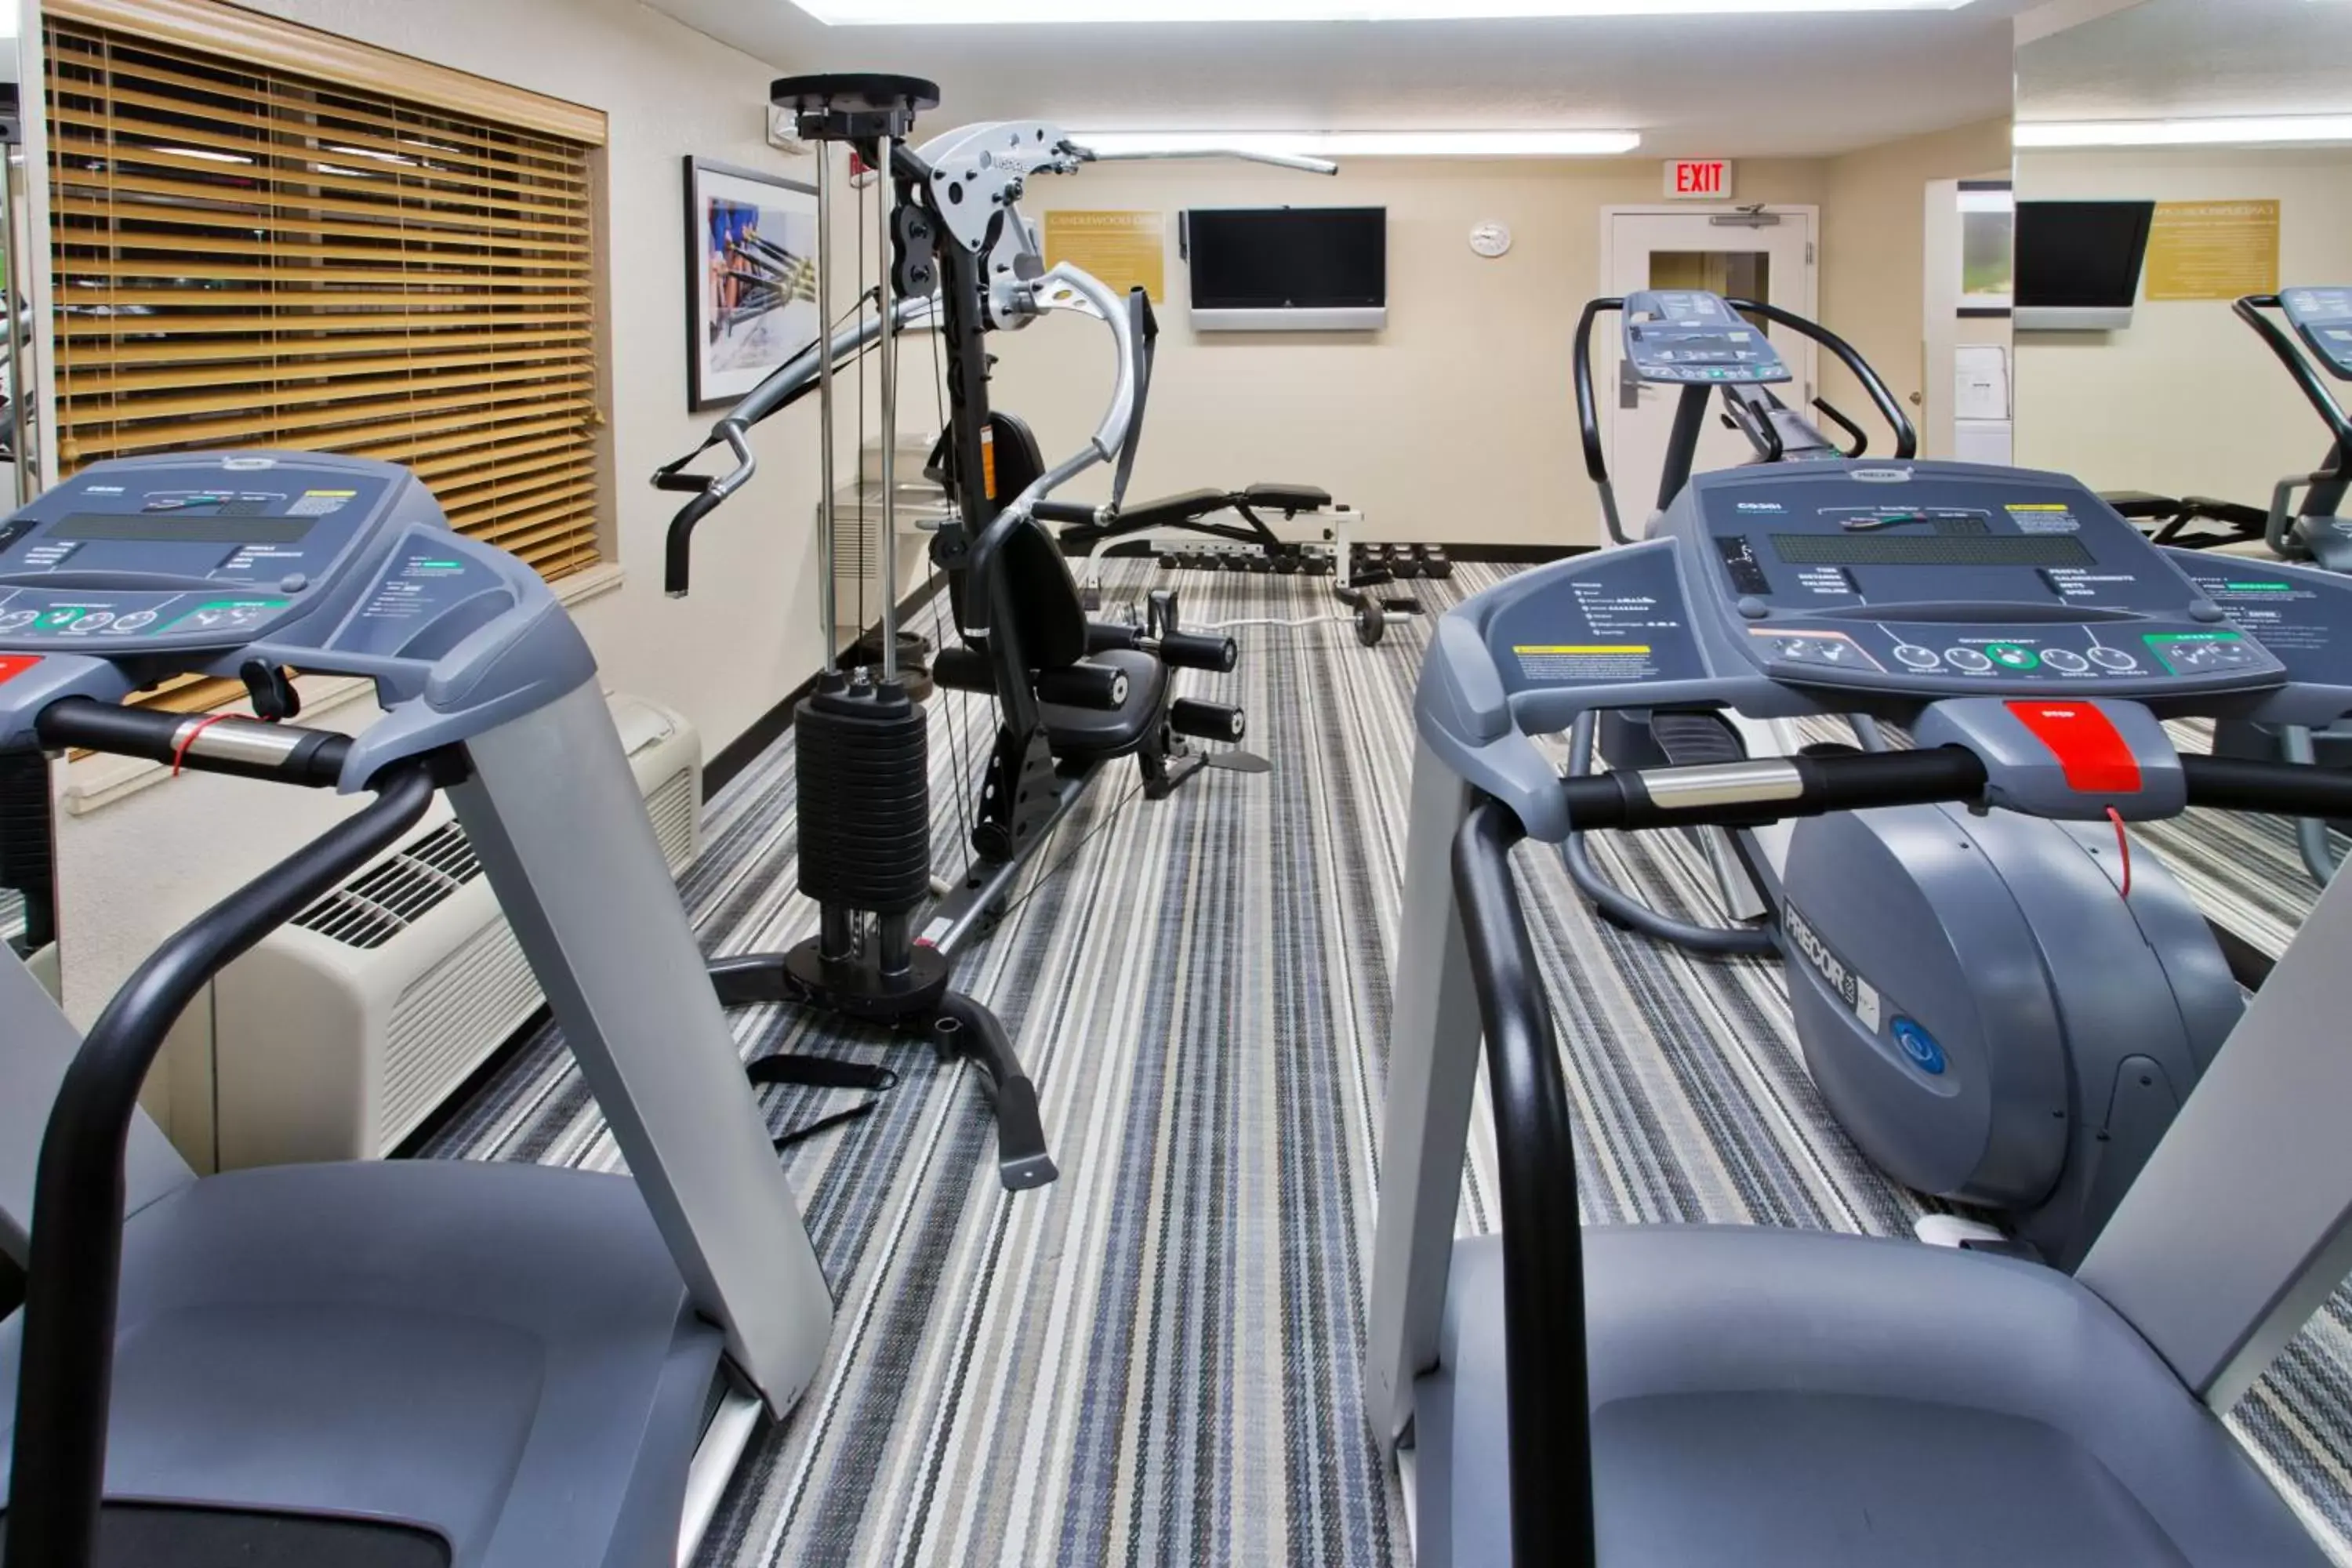 Fitness centre/facilities, Fitness Center/Facilities in Candlewood Suites Medford, an IHG Hotel